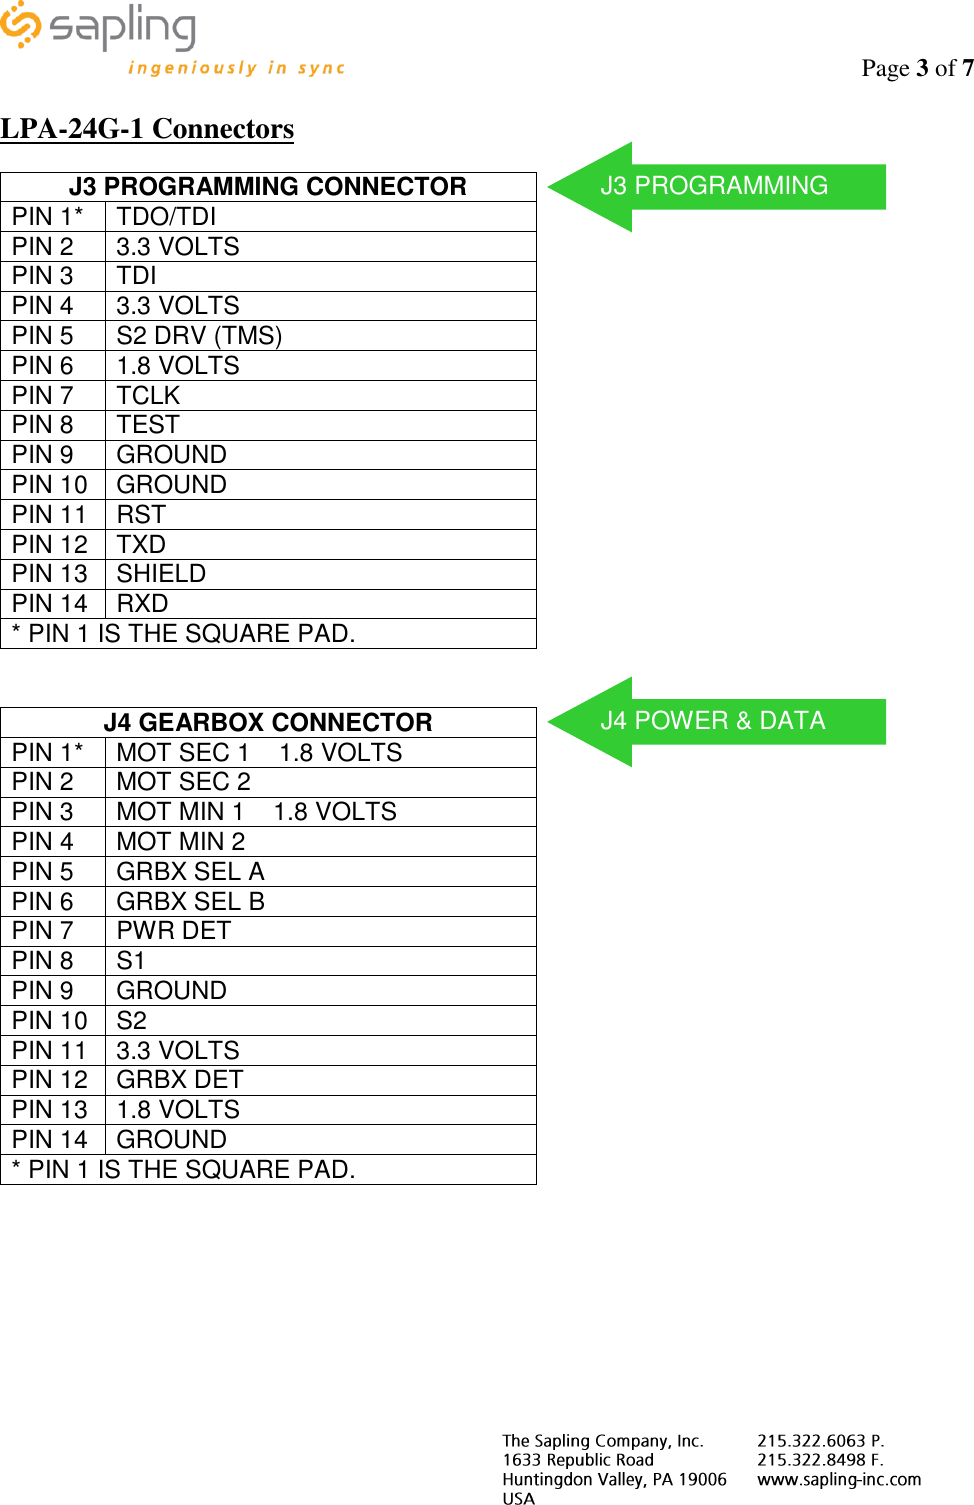                                                                                    Page 3 of 7     LPA-24G-1 Connectors                                       J3 PROGRAMMING CONNECTOR PIN 1* TDO/TDI PIN 2 3.3 VOLTS PIN 3 TDI PIN 4 3.3 VOLTS PIN 5 S2 DRV (TMS) PIN 6 1.8 VOLTS PIN 7 TCLK PIN 8 TEST PIN 9 GROUND PIN 10 GROUND PIN 11 RST PIN 12 TXD PIN 13 SHIELD PIN 14 RXD * PIN 1 IS THE SQUARE PAD. J4 GEARBOX CONNECTOR PIN 1* MOT SEC 1    1.8 VOLTS PIN 2 MOT SEC 2 PIN 3 MOT MIN 1    1.8 VOLTS PIN 4 MOT MIN 2 PIN 5 GRBX SEL A PIN 6 GRBX SEL B PIN 7 PWR DET PIN 8 S1 PIN 9 GROUND PIN 10 S2 PIN 11 3.3 VOLTS PIN 12 GRBX DET PIN 13 1.8 VOLTS PIN 14 GROUND * PIN 1 IS THE SQUARE PAD. J3 PROGRAMMING J4 POWER &amp; DATA 